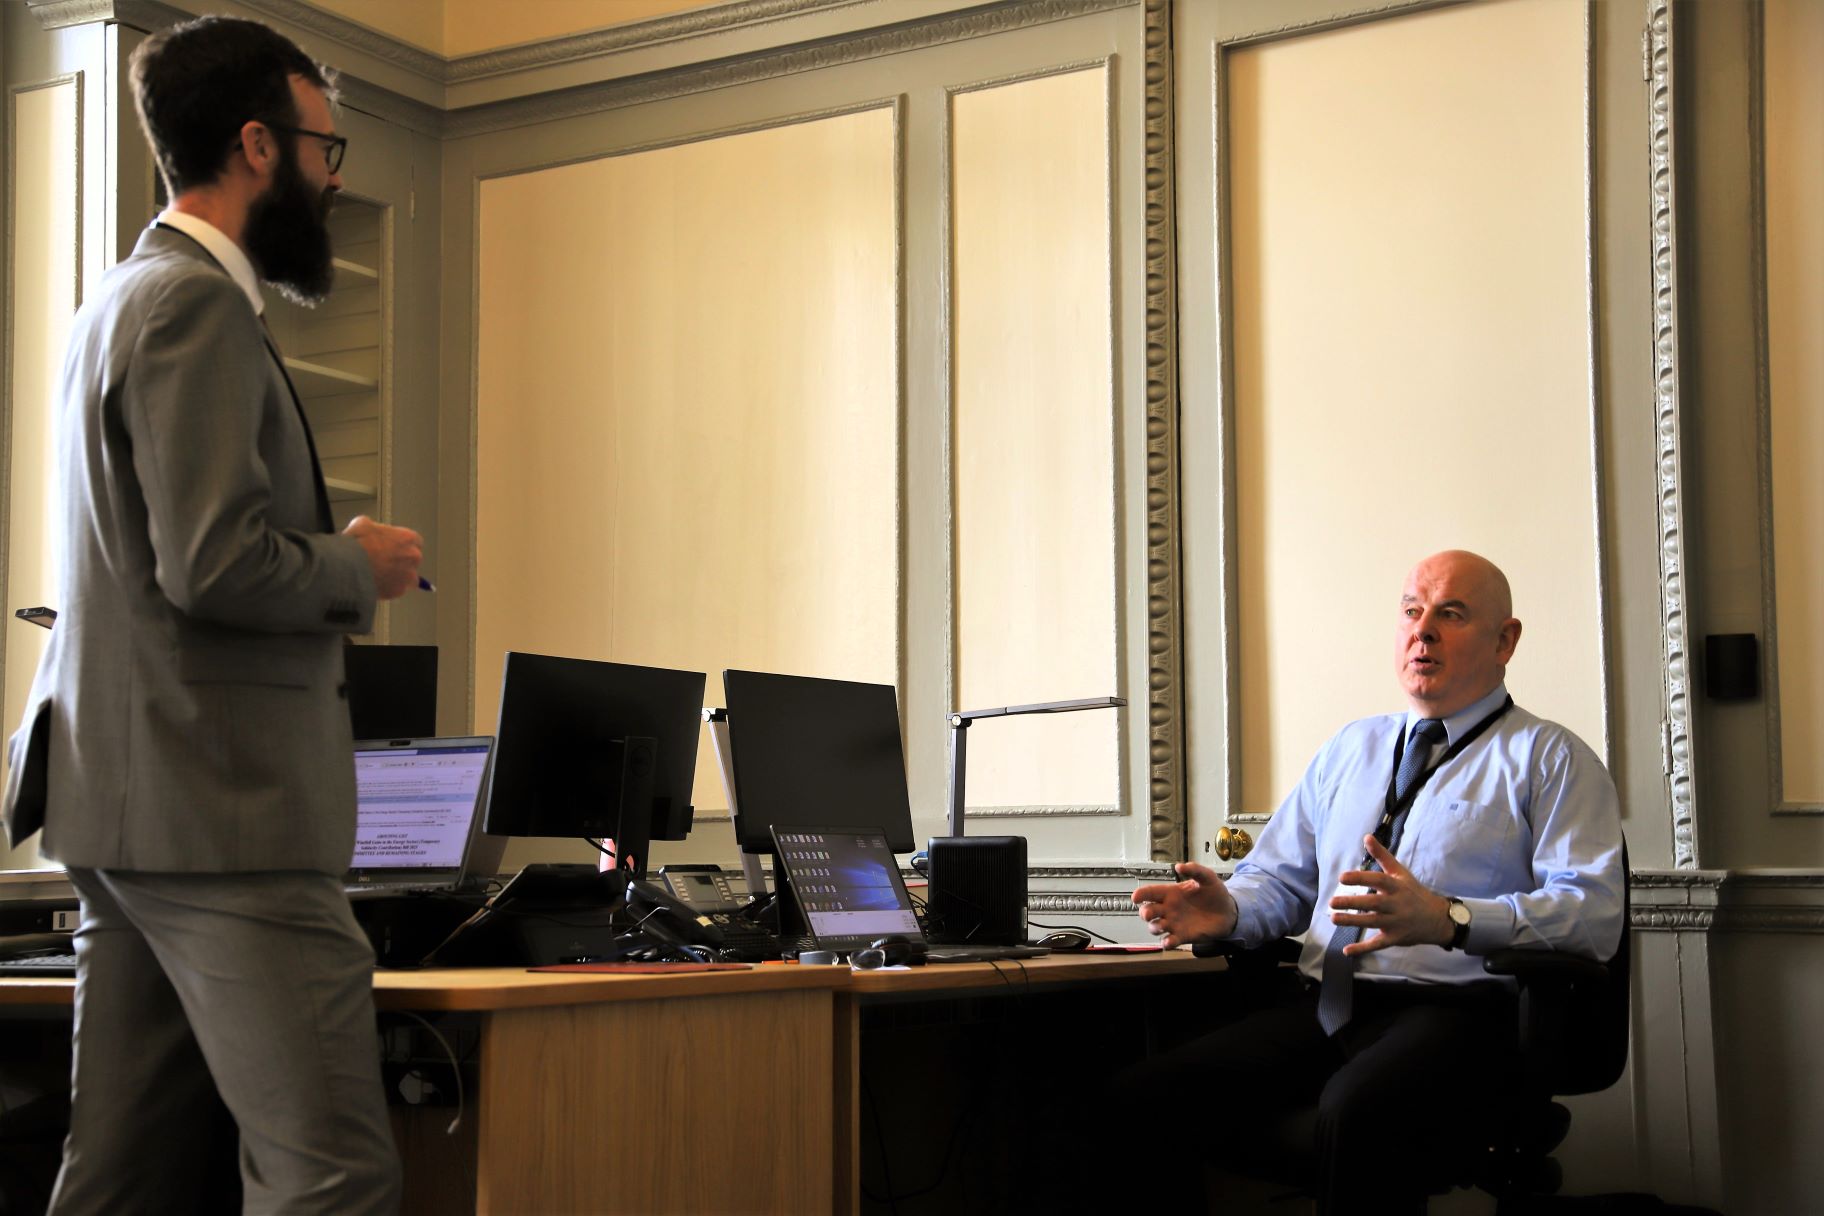 A parliamentary reporter is standing in his office speaking to a colleague, who is seated